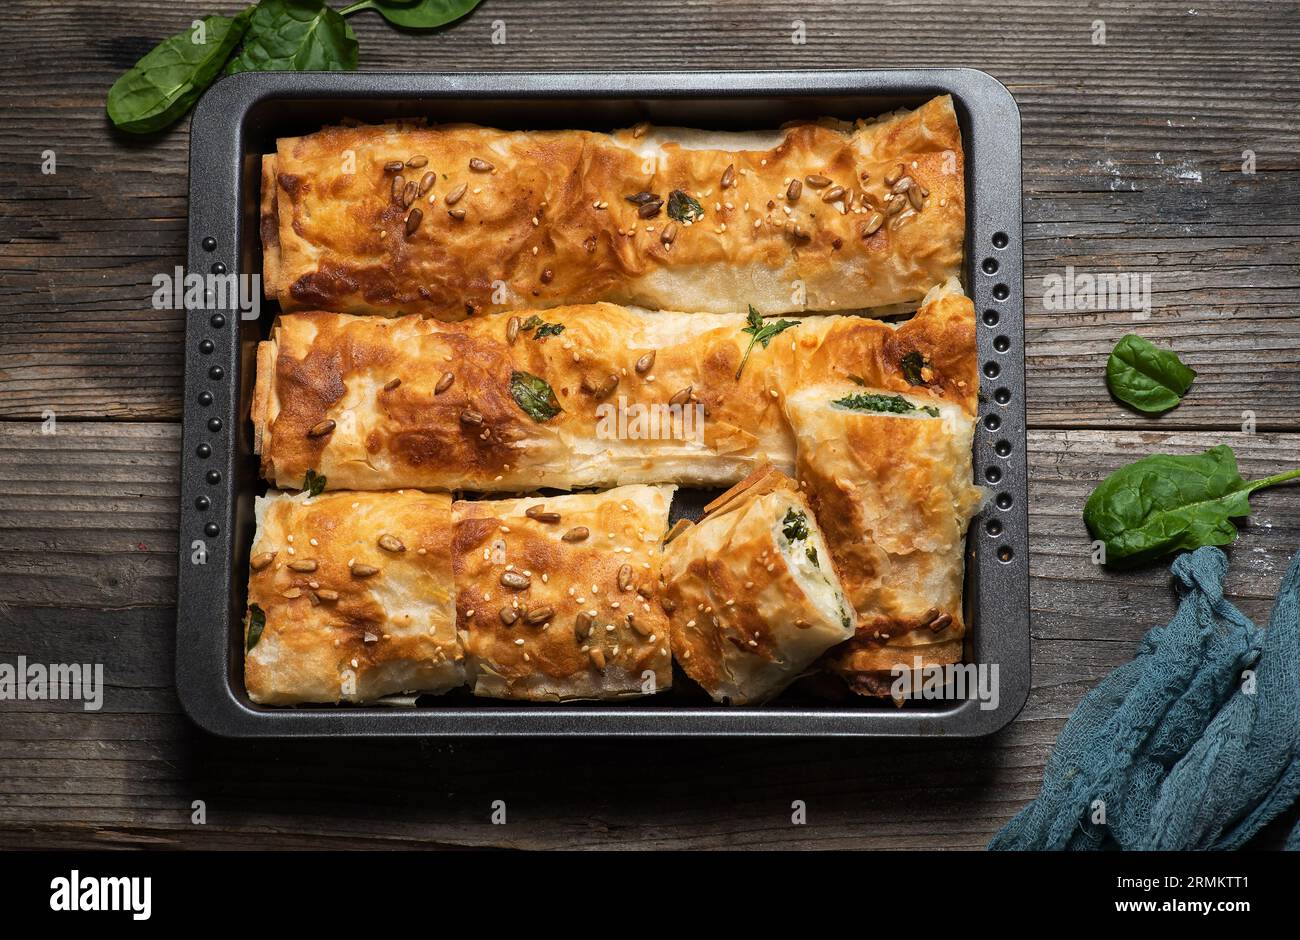 Freshly baked homemade rolled pie with spinach in a baking tray on a wooden background. Top view. Stock Photo